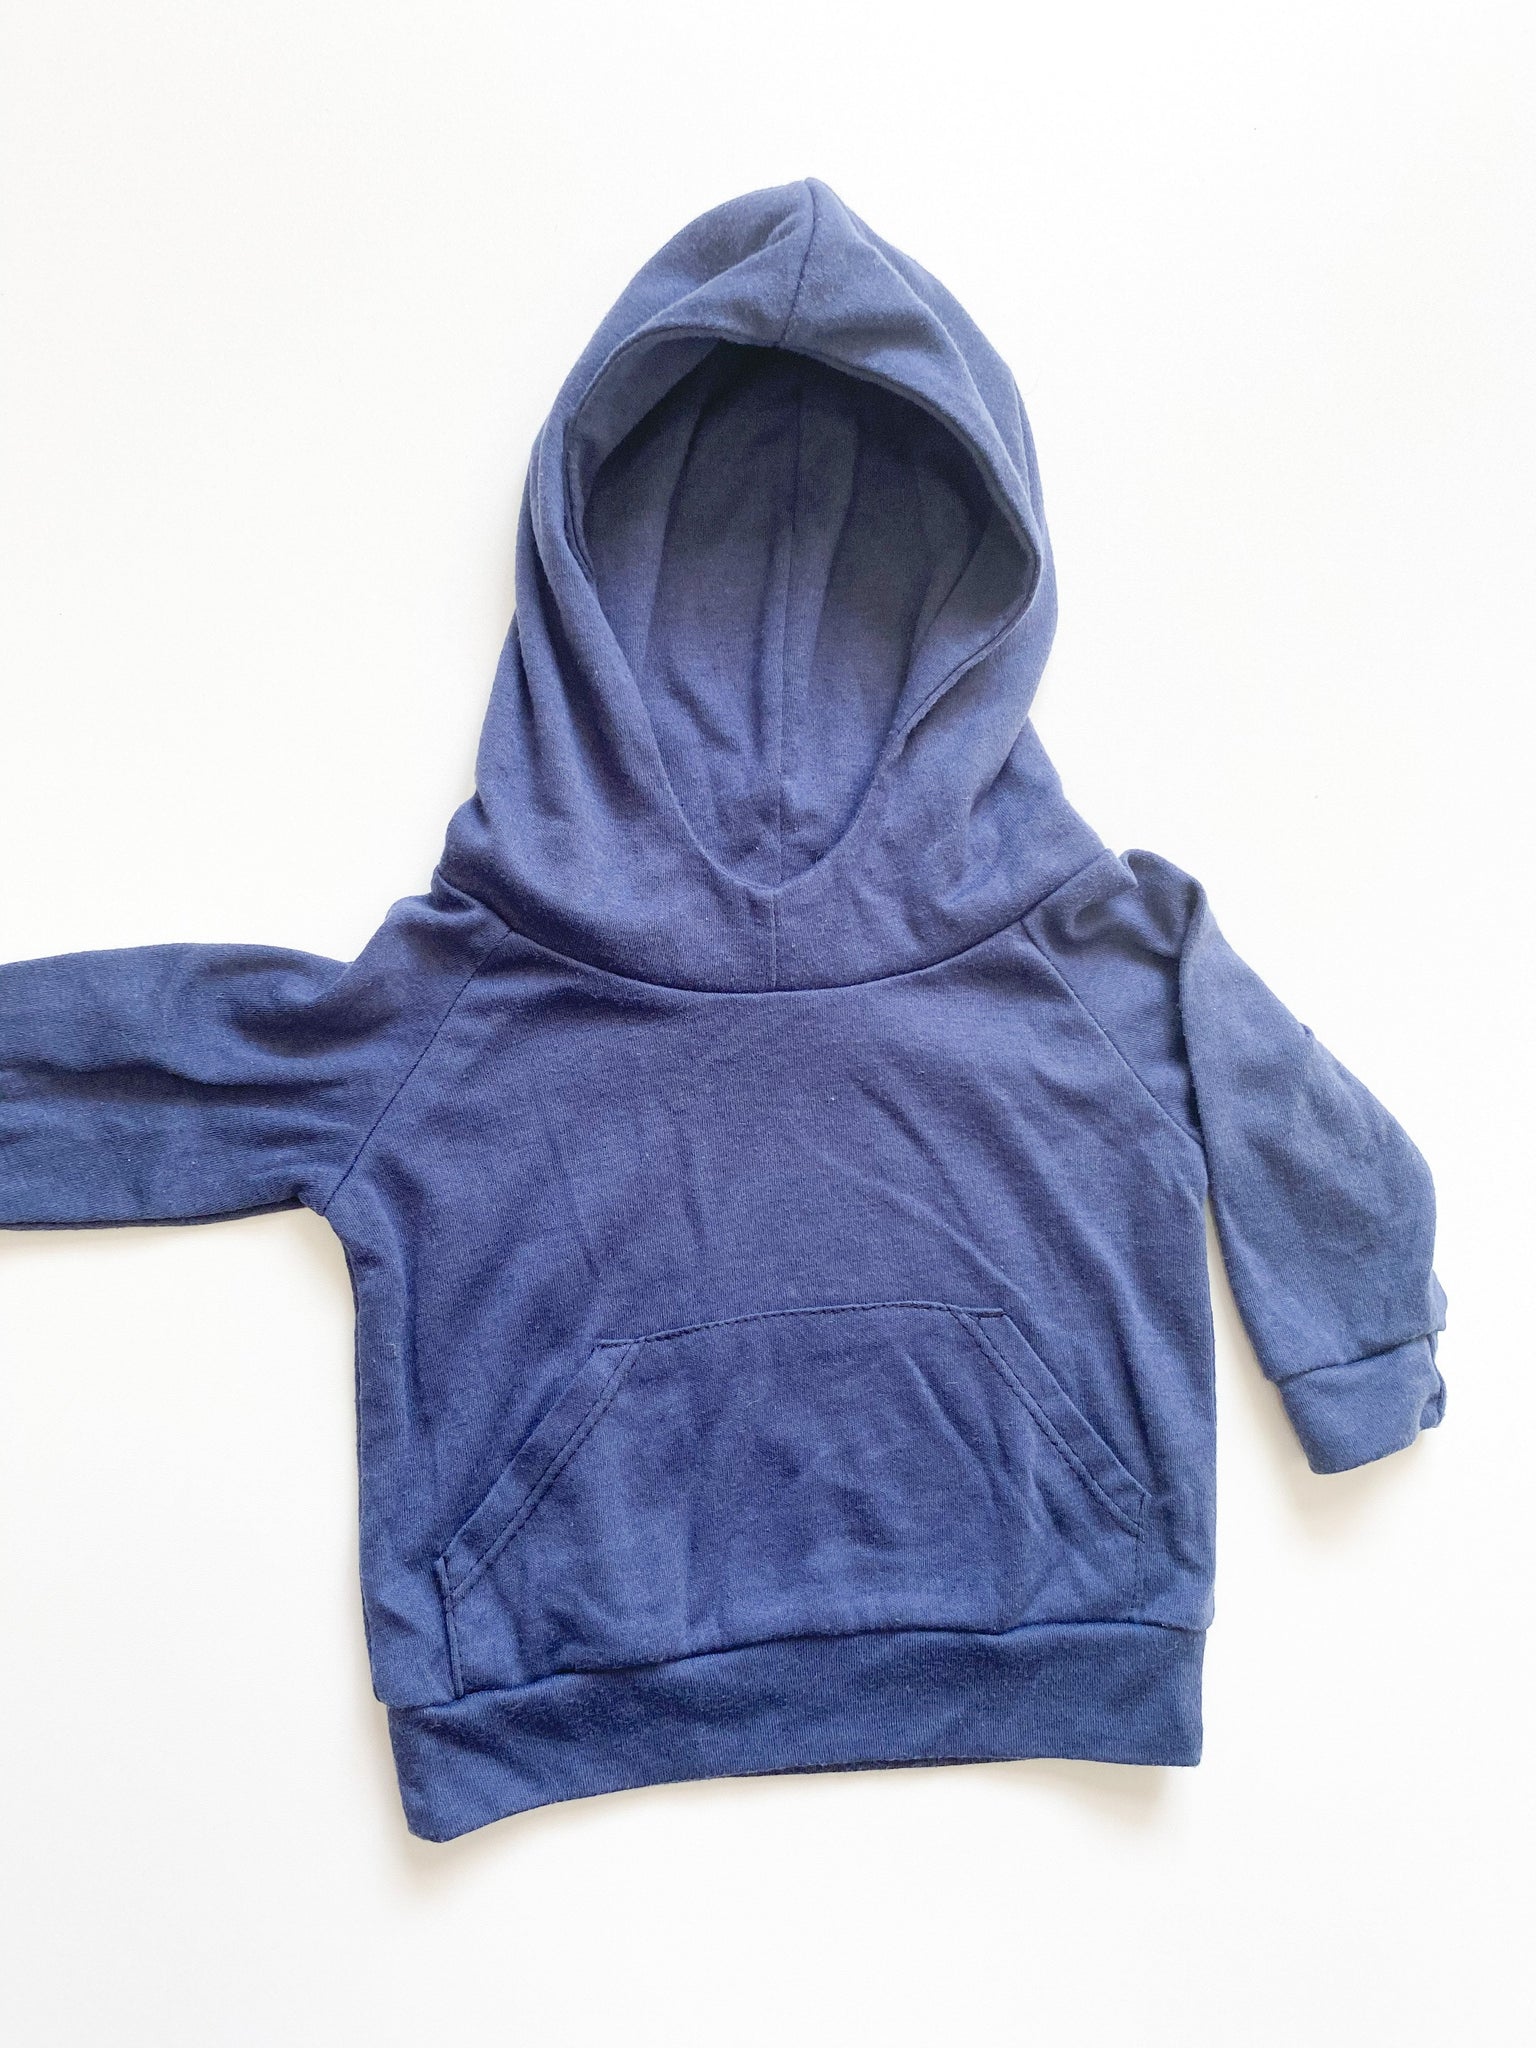 Sweater Hooded - Navy (3-6M)